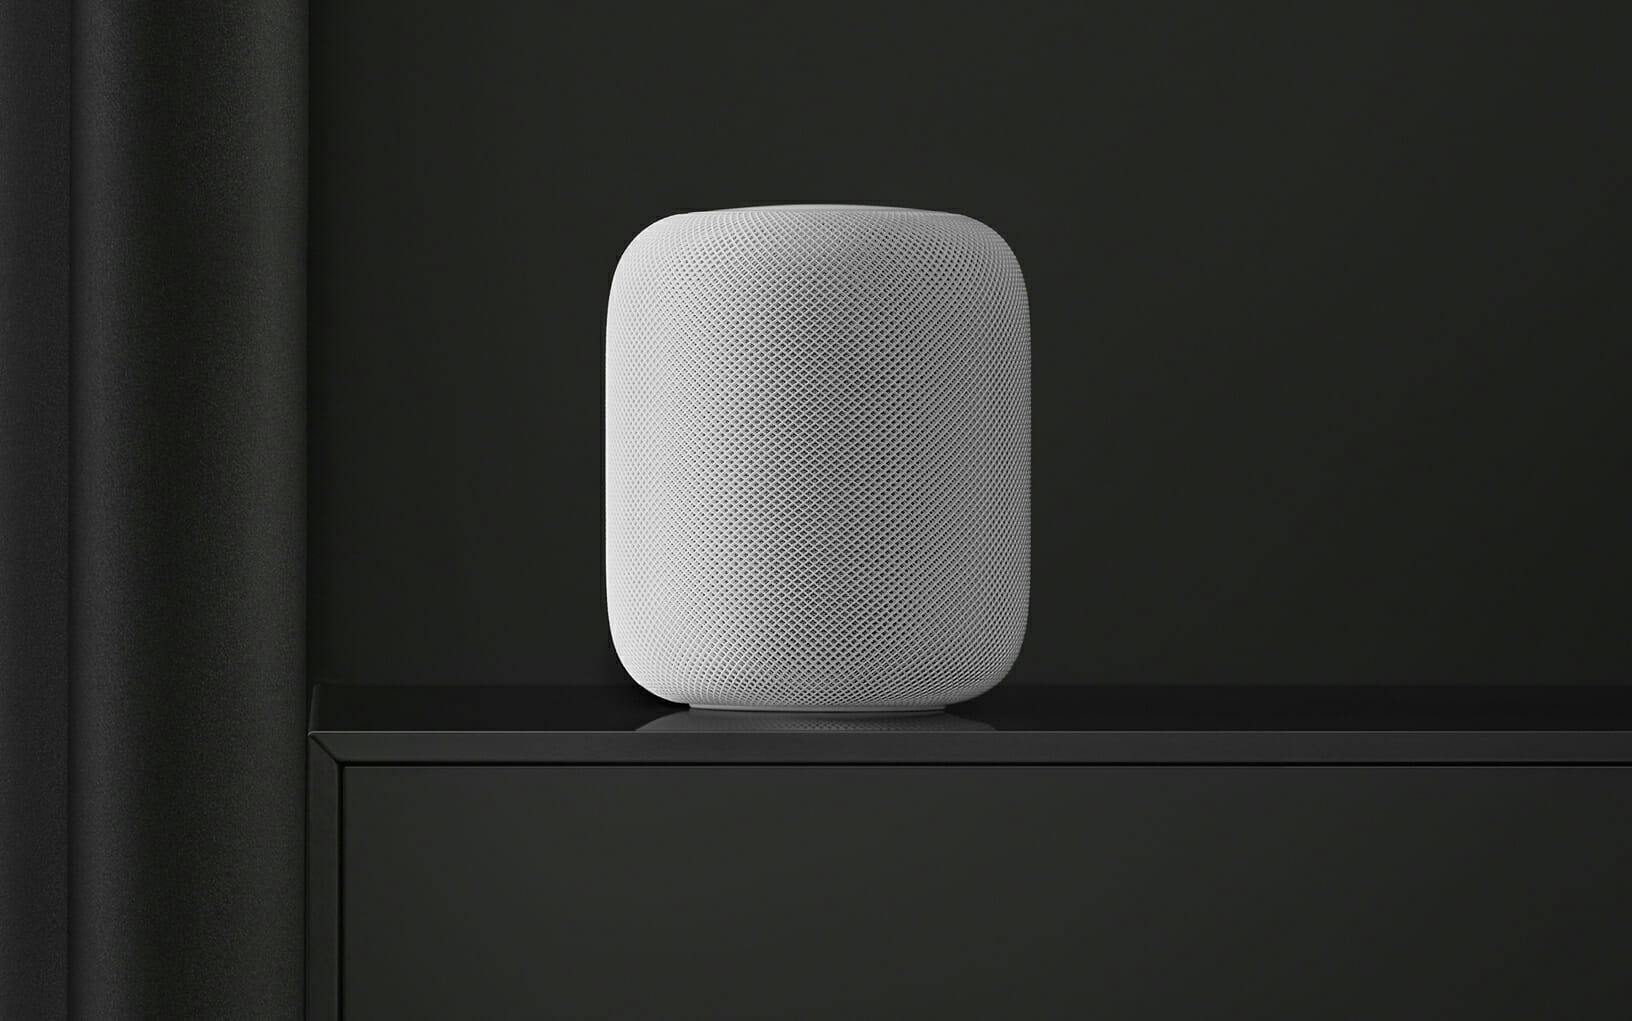 Connect Apple TV and HomePod